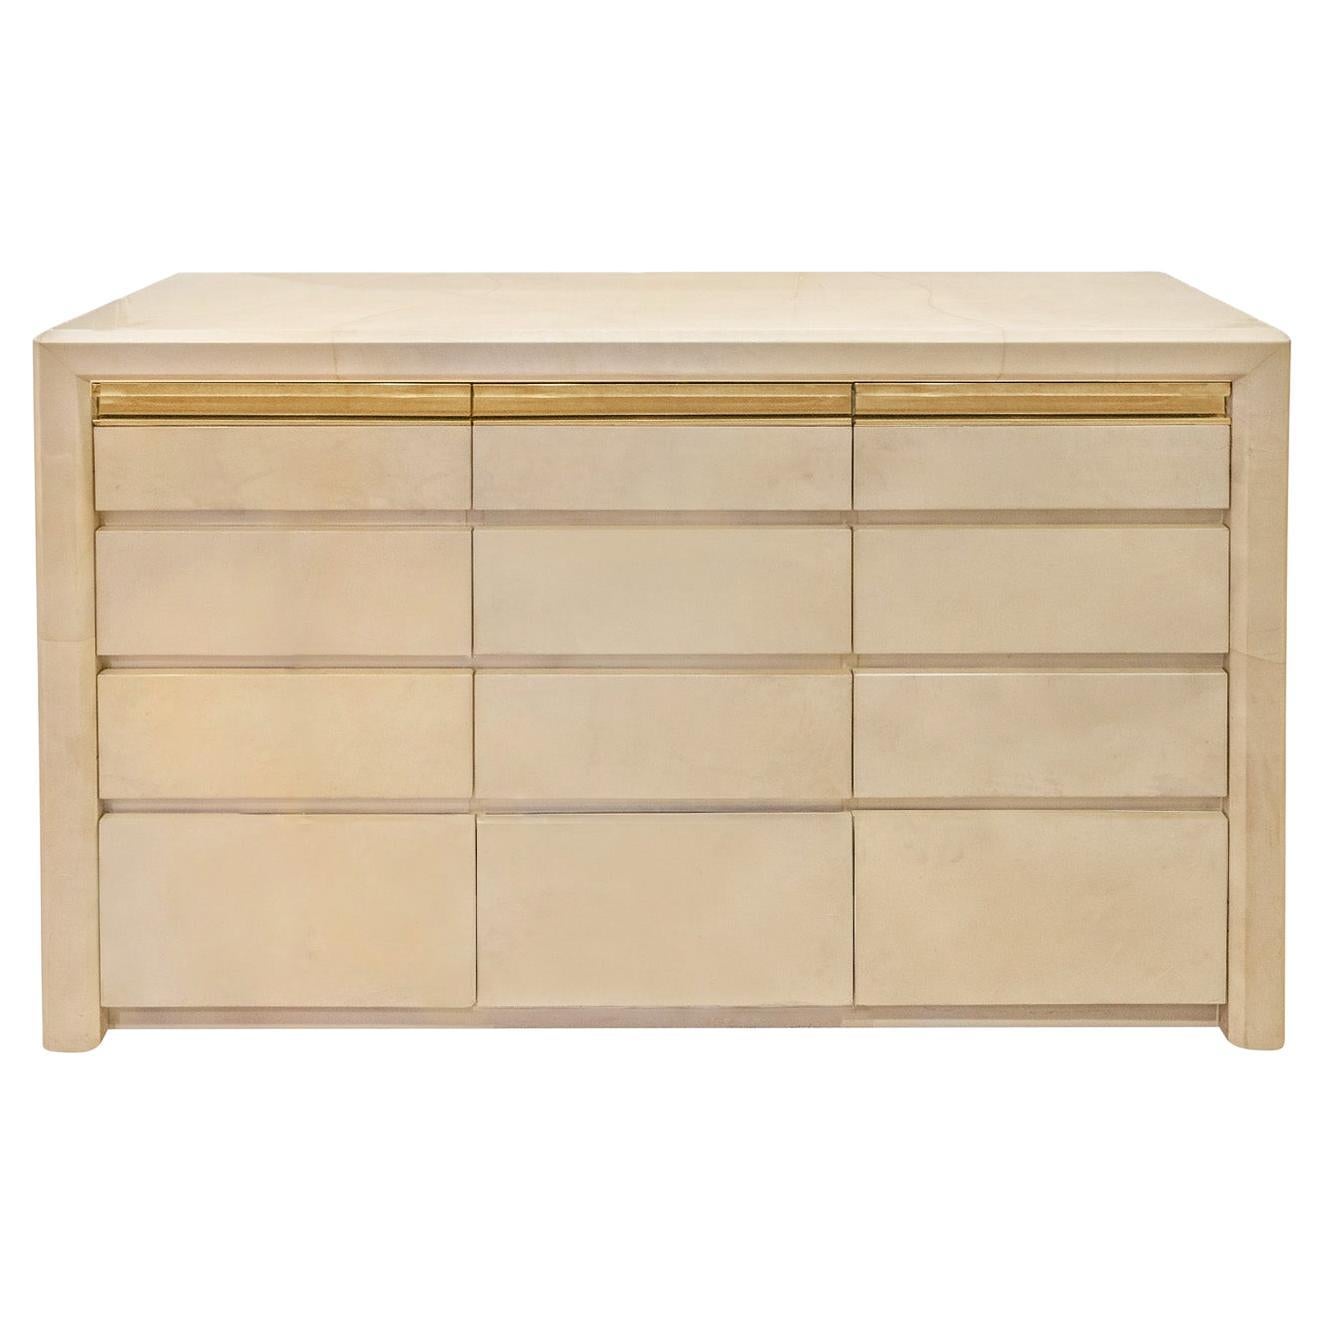 Karl Springer Impressive Chest of Drawers in Lacquered Goatskin, circa 1980s For Sale